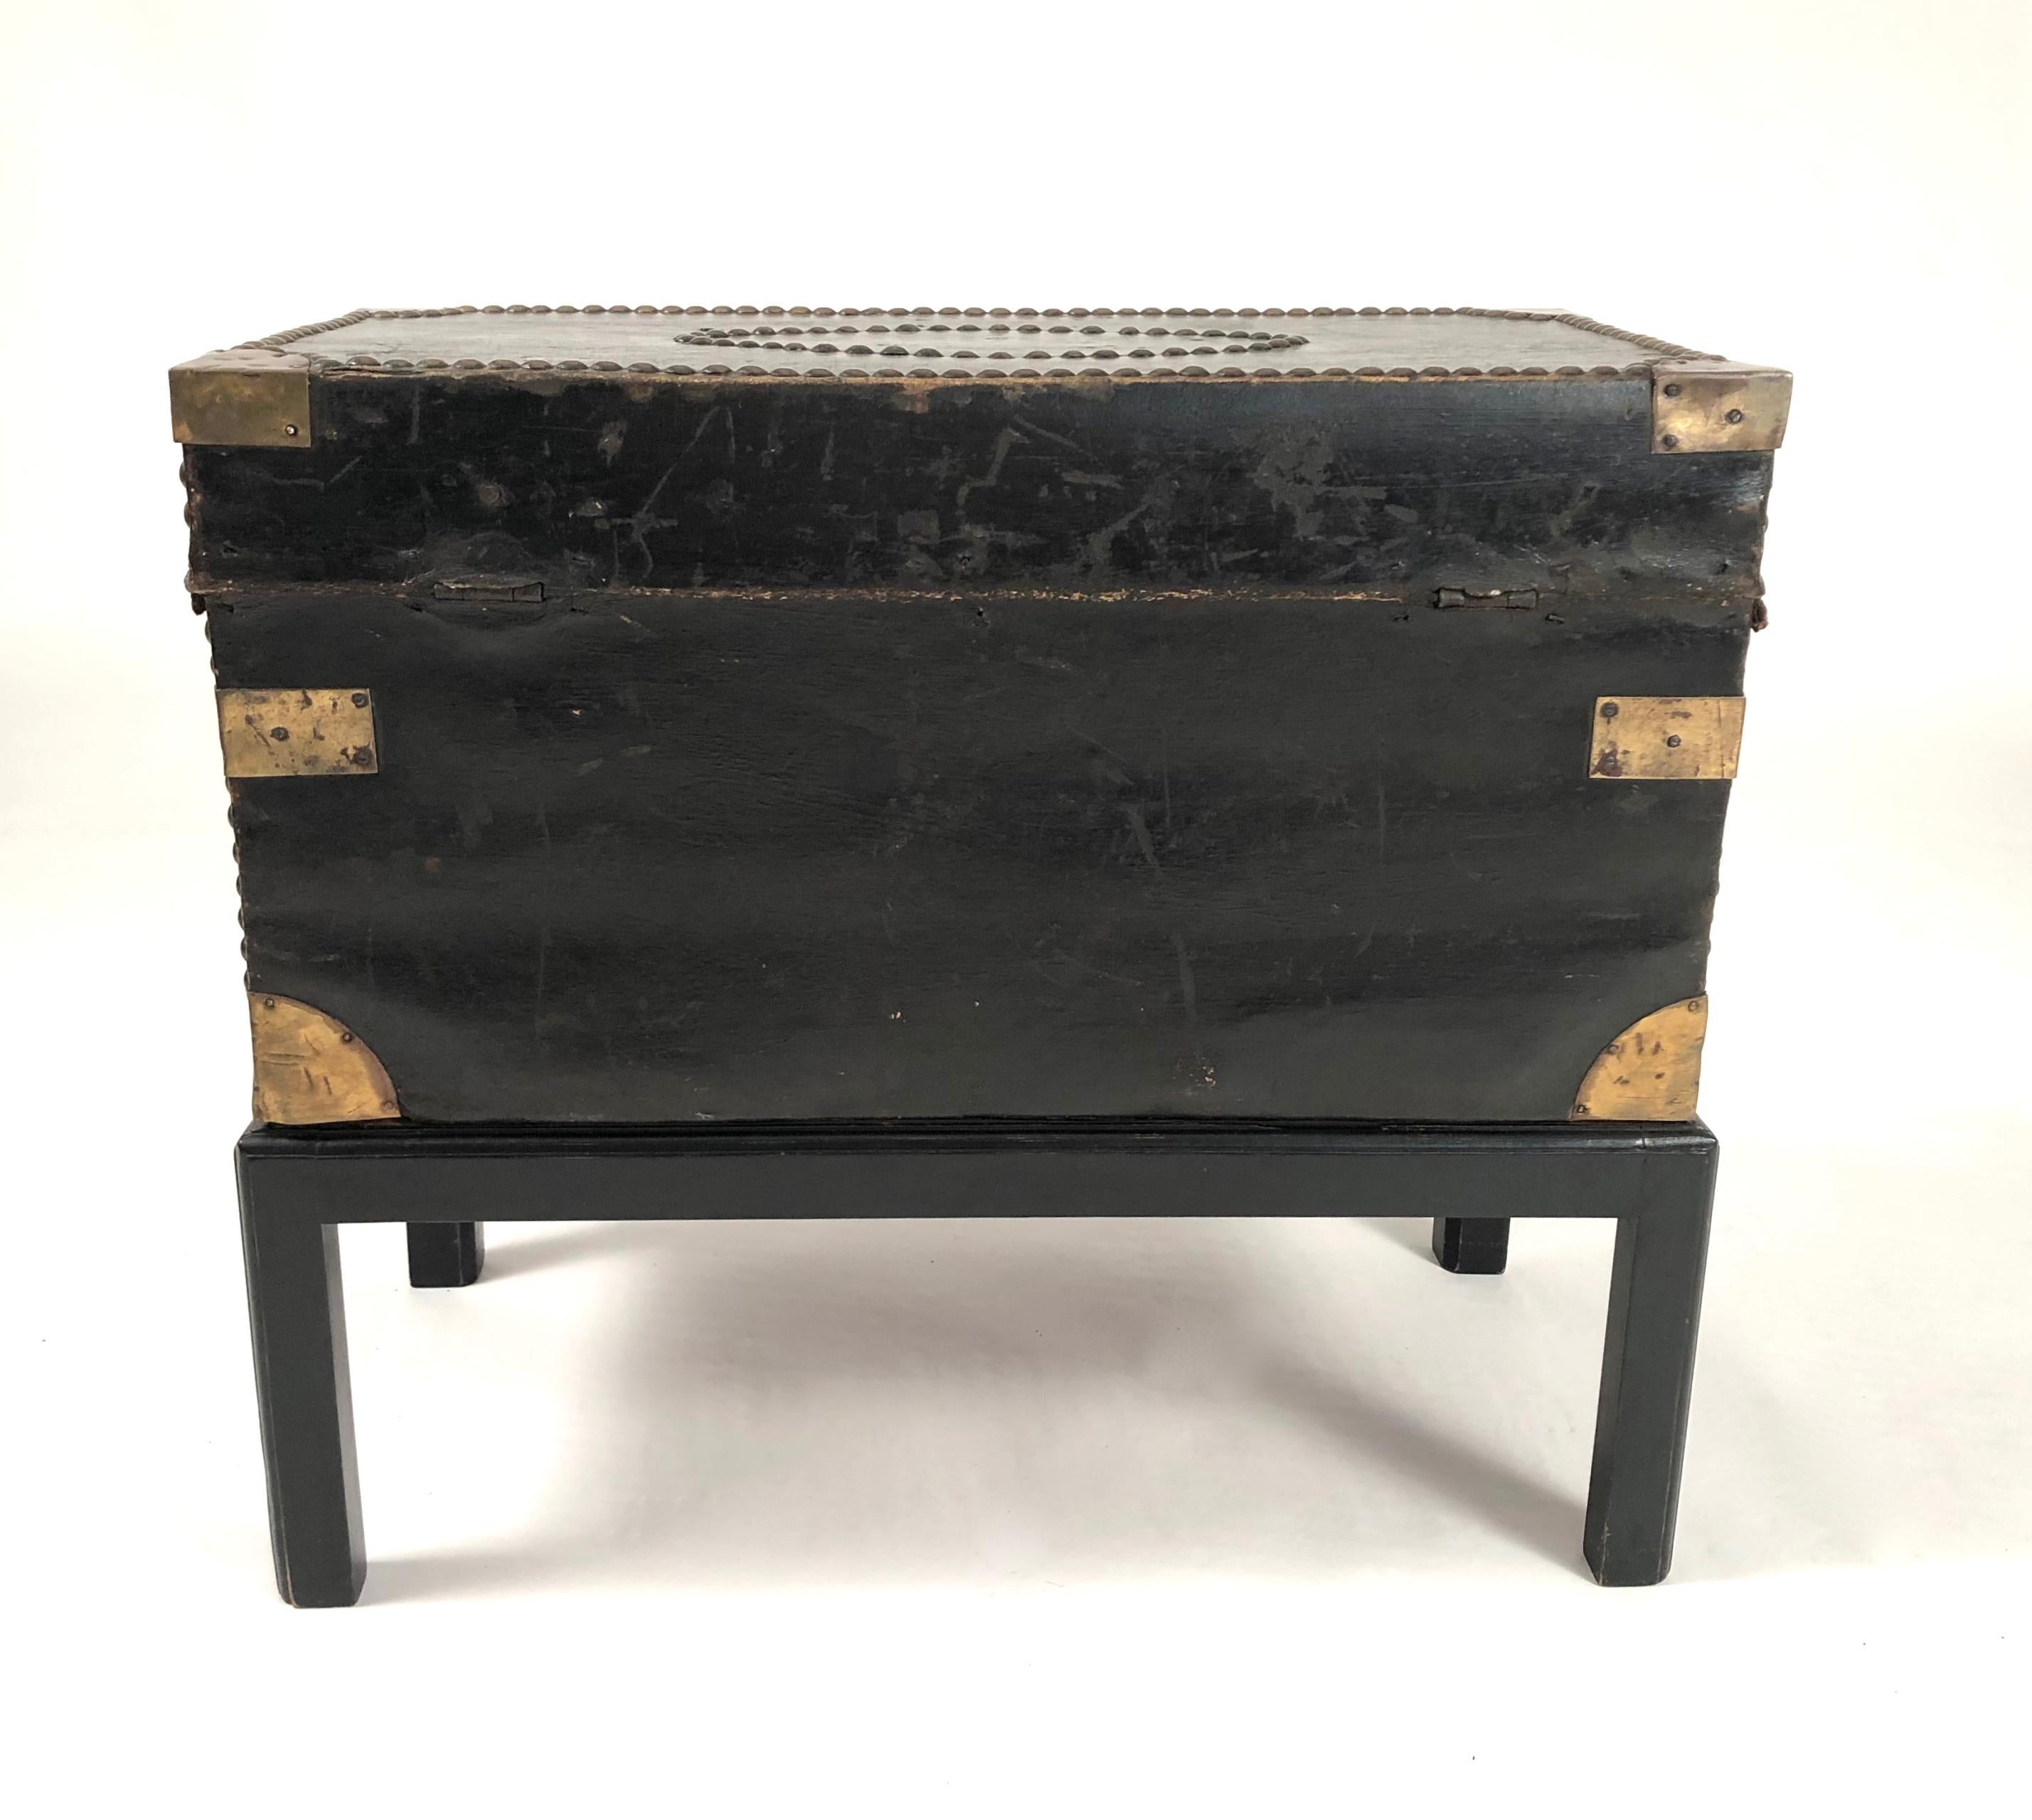 Painted Brass Stud Decorated Leather Sea Captain's Chest on Stand, circa 1810-1820